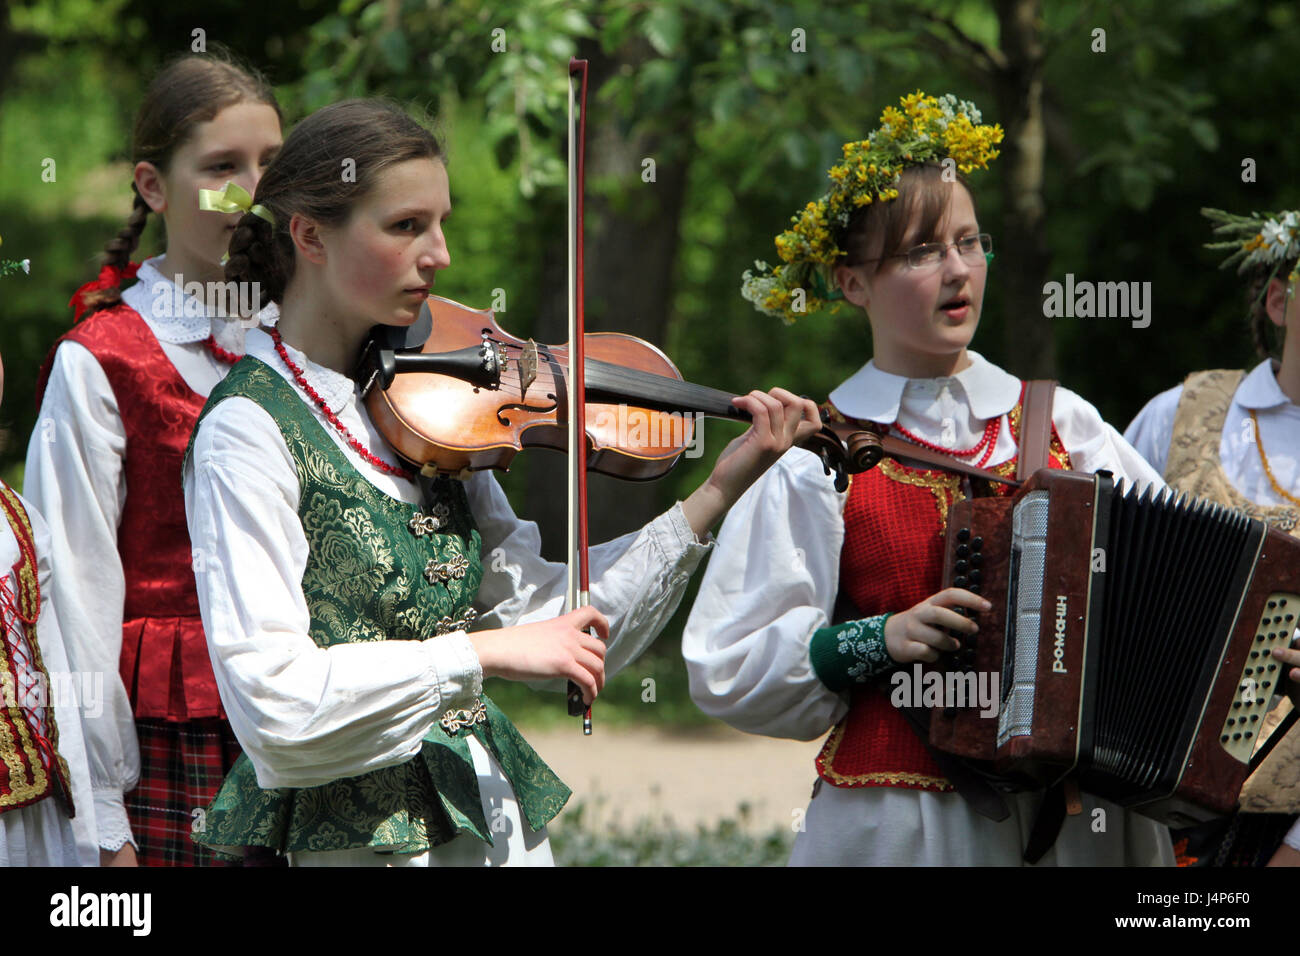 Lithuania, Vilnius, Old Town, folklore feast, girl, music group, play, half portrait, Stock Photo